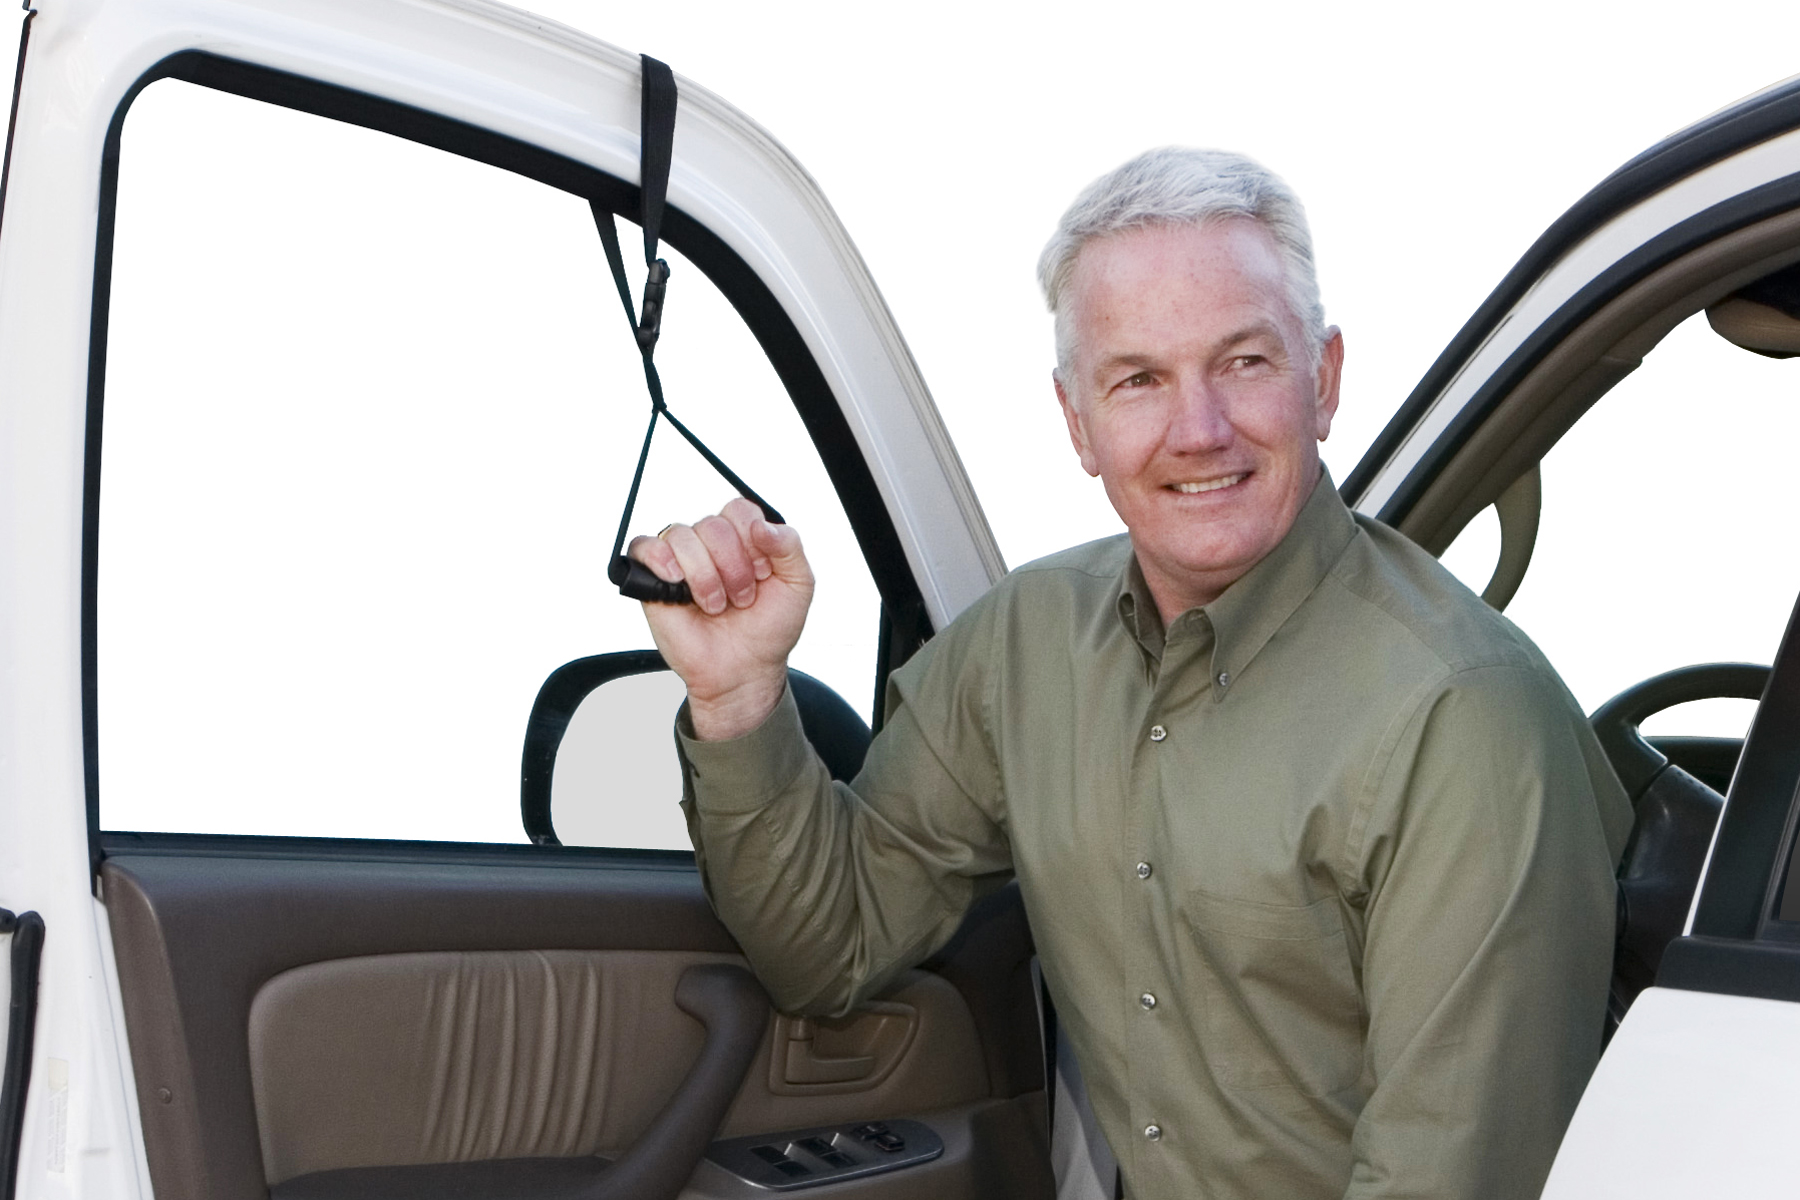 The Handybar makes it easier for seniors, the elderly and mobility impaired  users to get in an out of the car